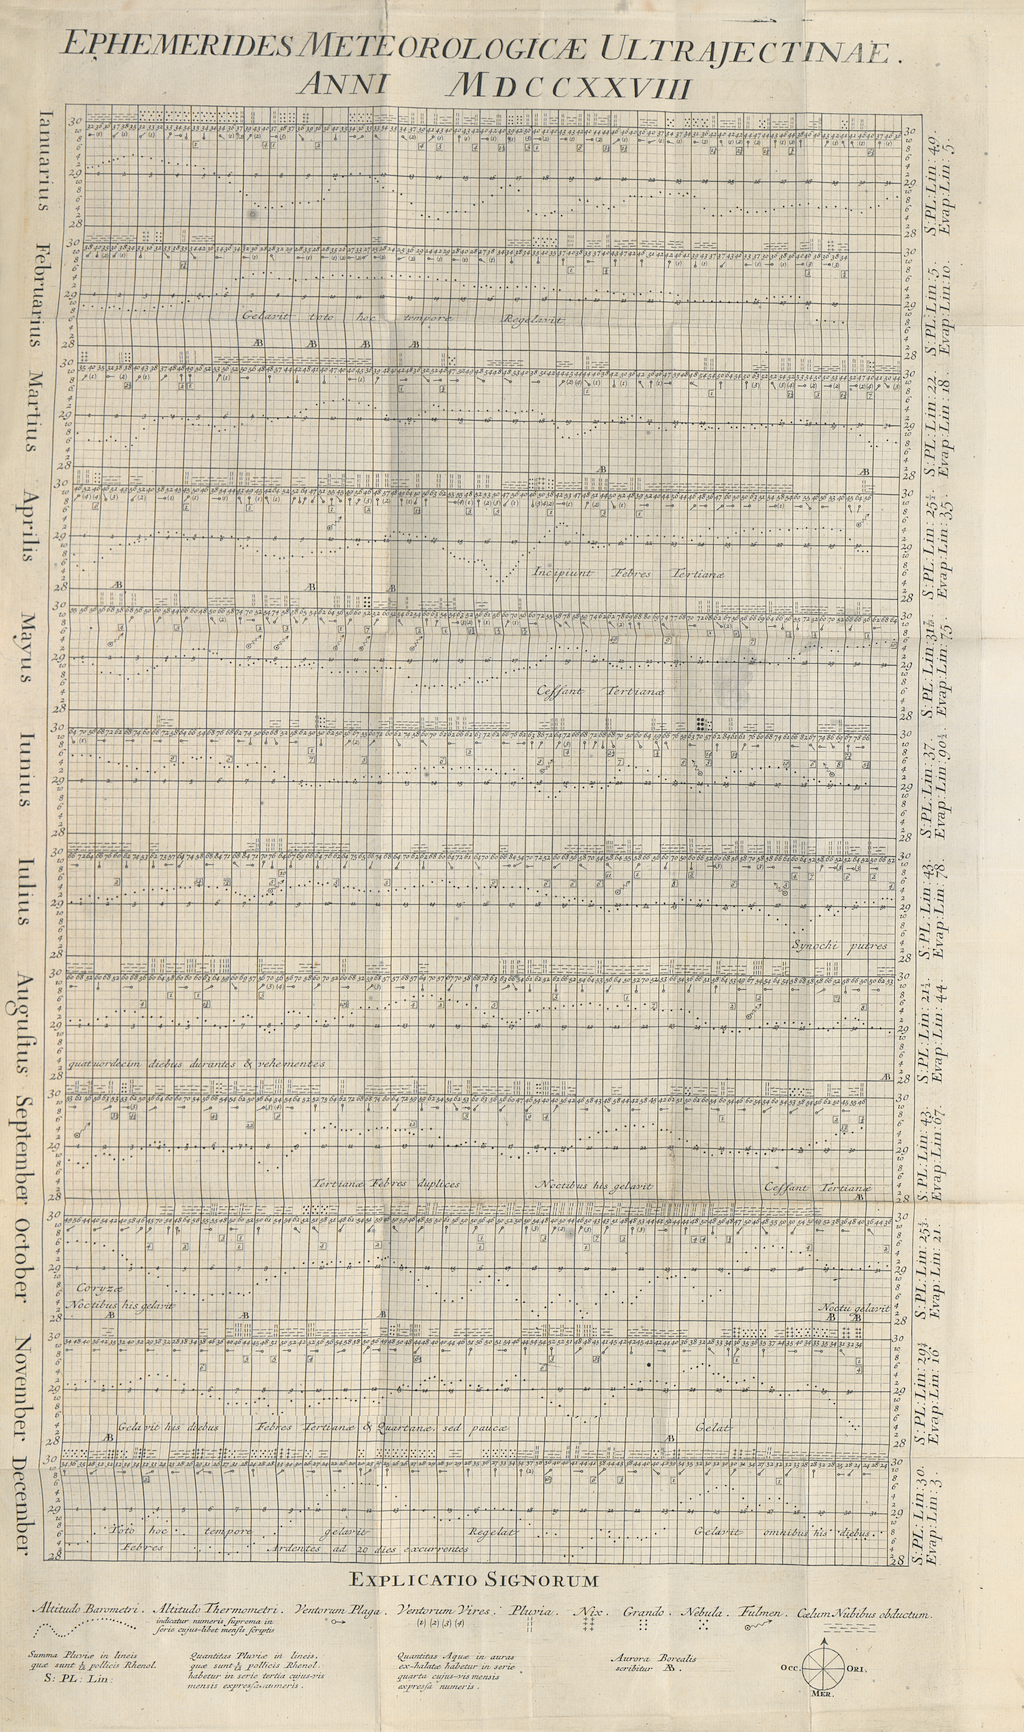 The image shows Musschenbroek’s chart on his wether observations in Utrecht. On the chart the air pressure is presented by dots.